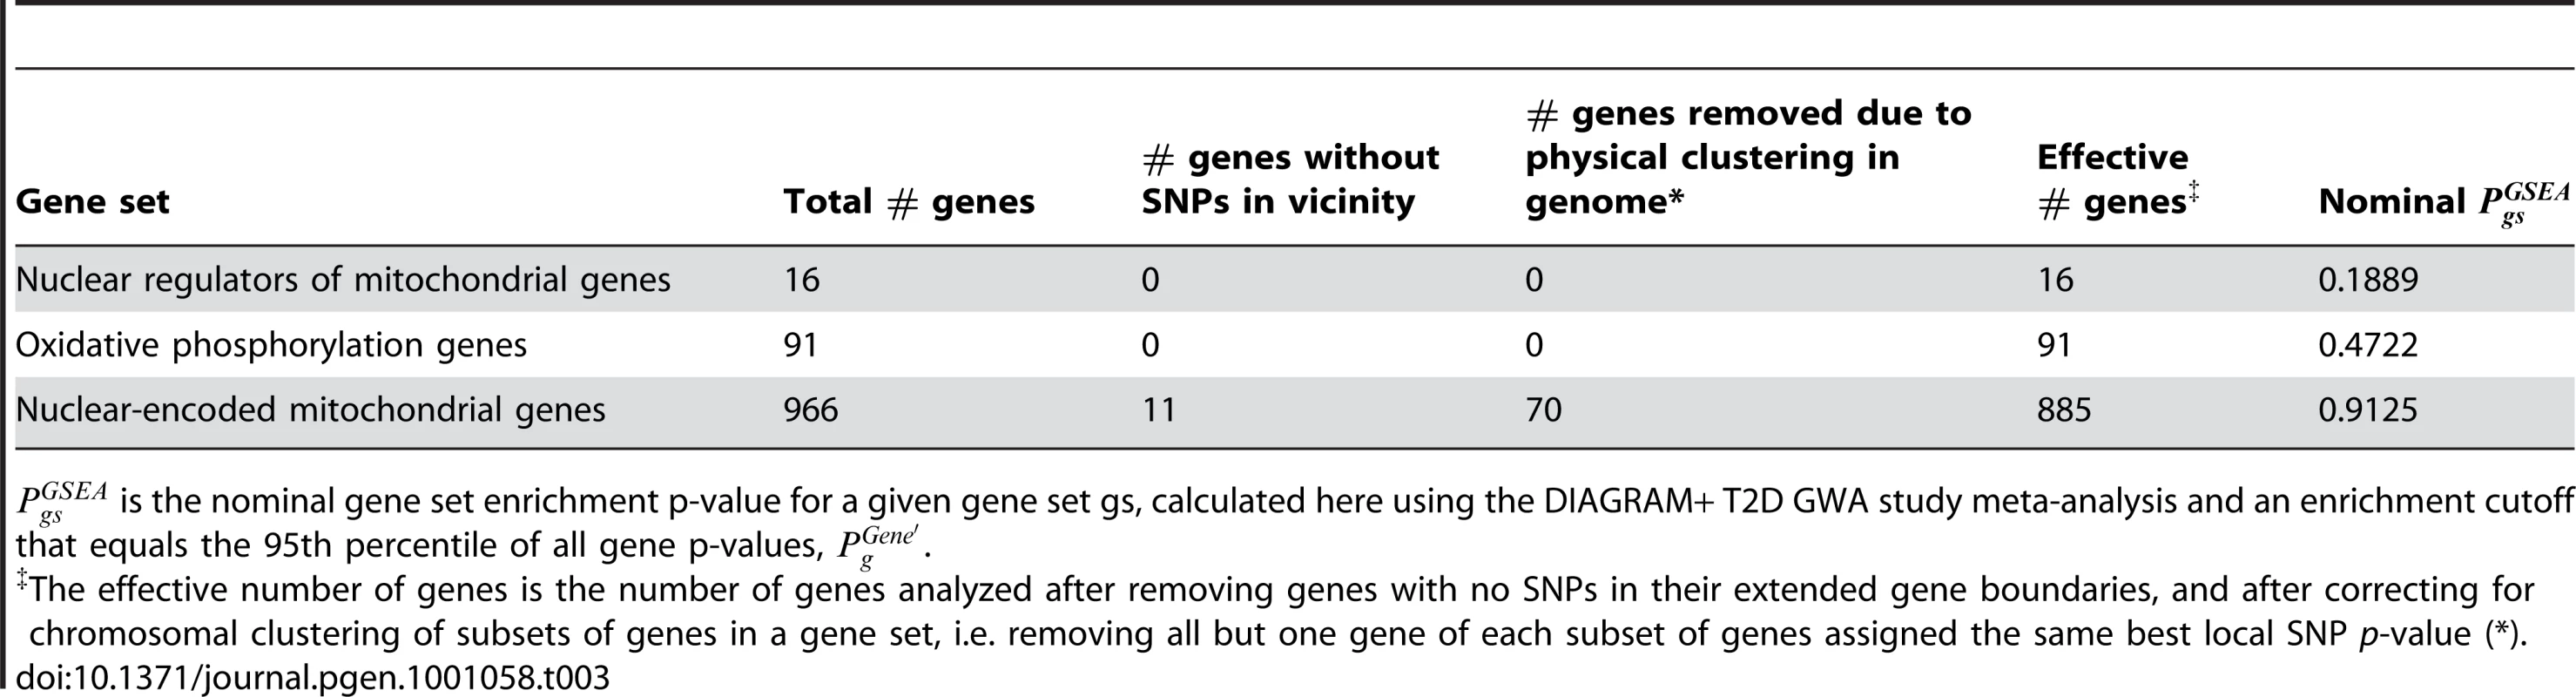 Mitochondria-related gene sets are not enriched for associations with type 2 diabetes.